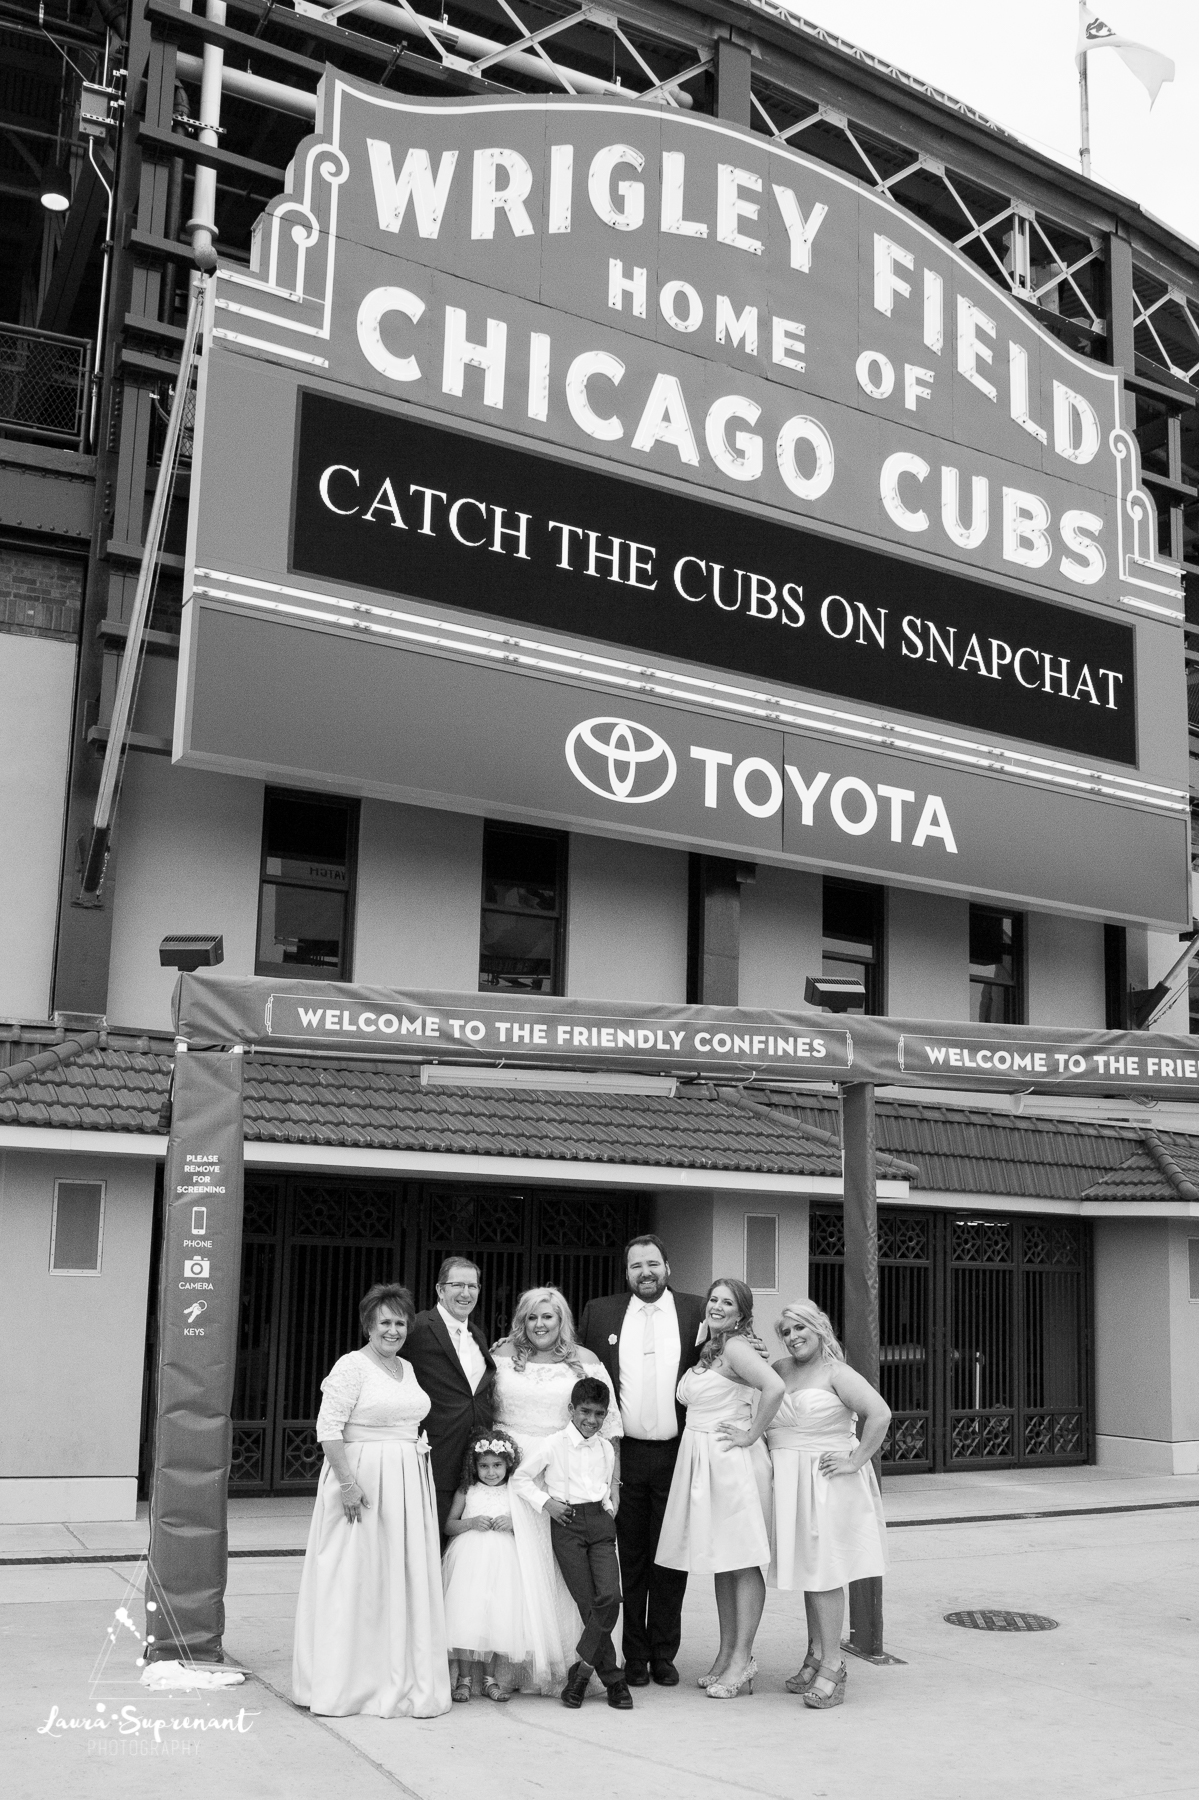 wedding_photography_chicago_wrigley_field_ravenswood_event_center_laura_suprenant (39 of 82).jpg